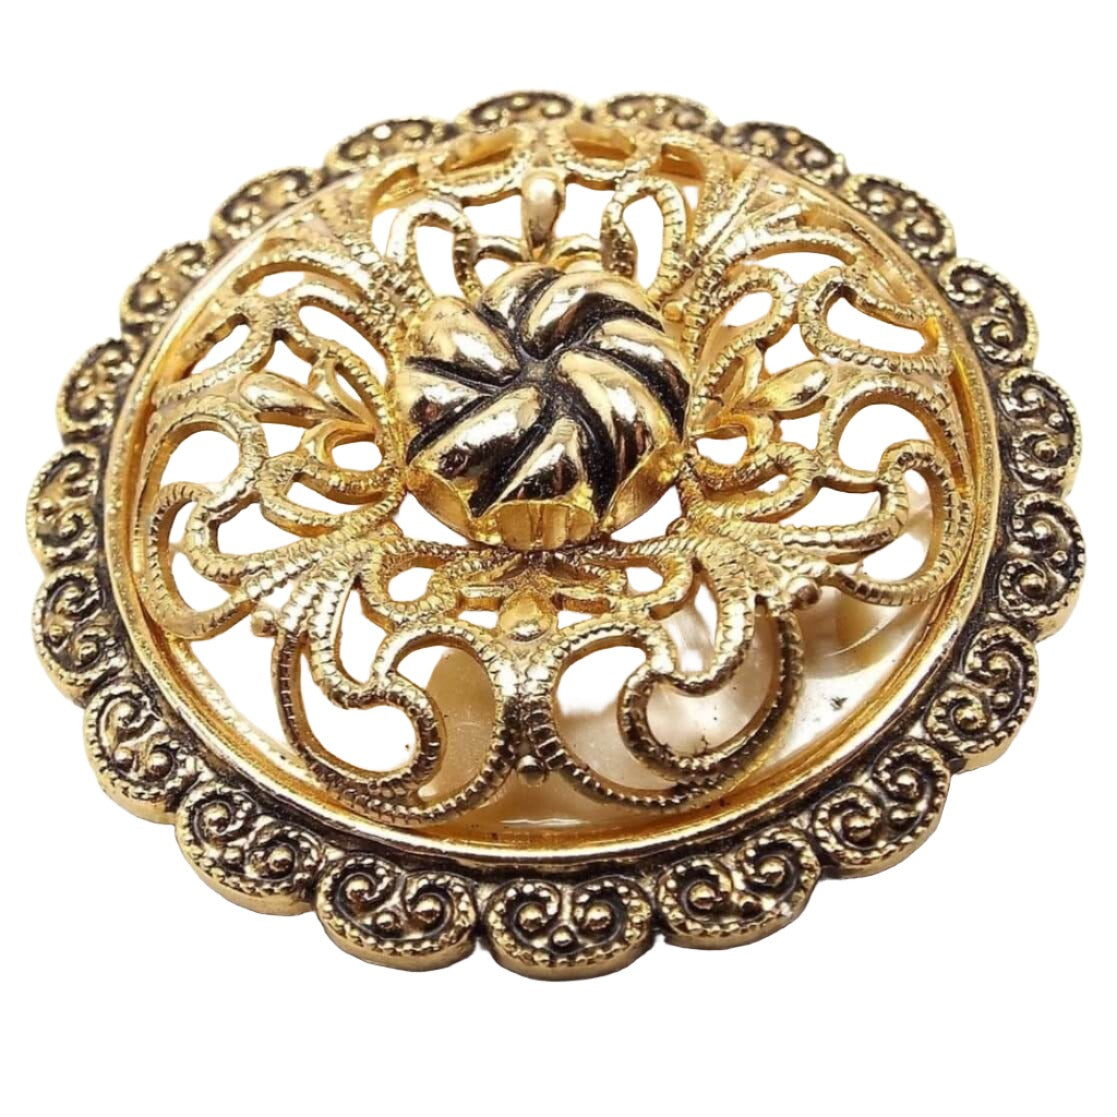 Front view of the Mid Century vintage German scarf clip. It is round in shape with a scalloped textured edge. The top is domed with a filigree design in gold color over a plastic pearly off white background underneath. The middle has a round gold tone bead with a textured twist like appearance. 